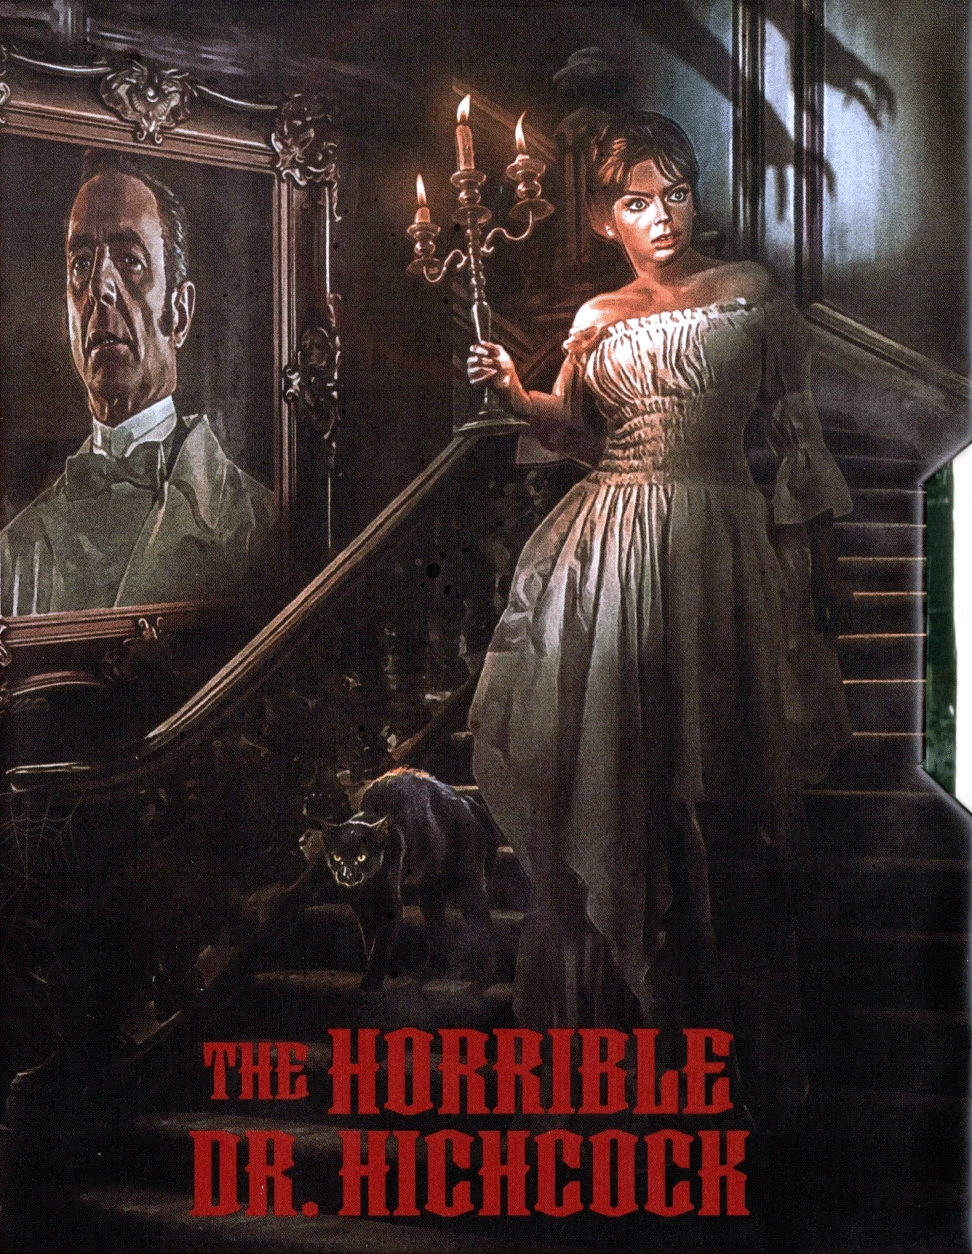 THE HORRIBLE DR. HICHCOCK - 4K ULTRA HD / BLU-RAY (LIMITED EDITION)